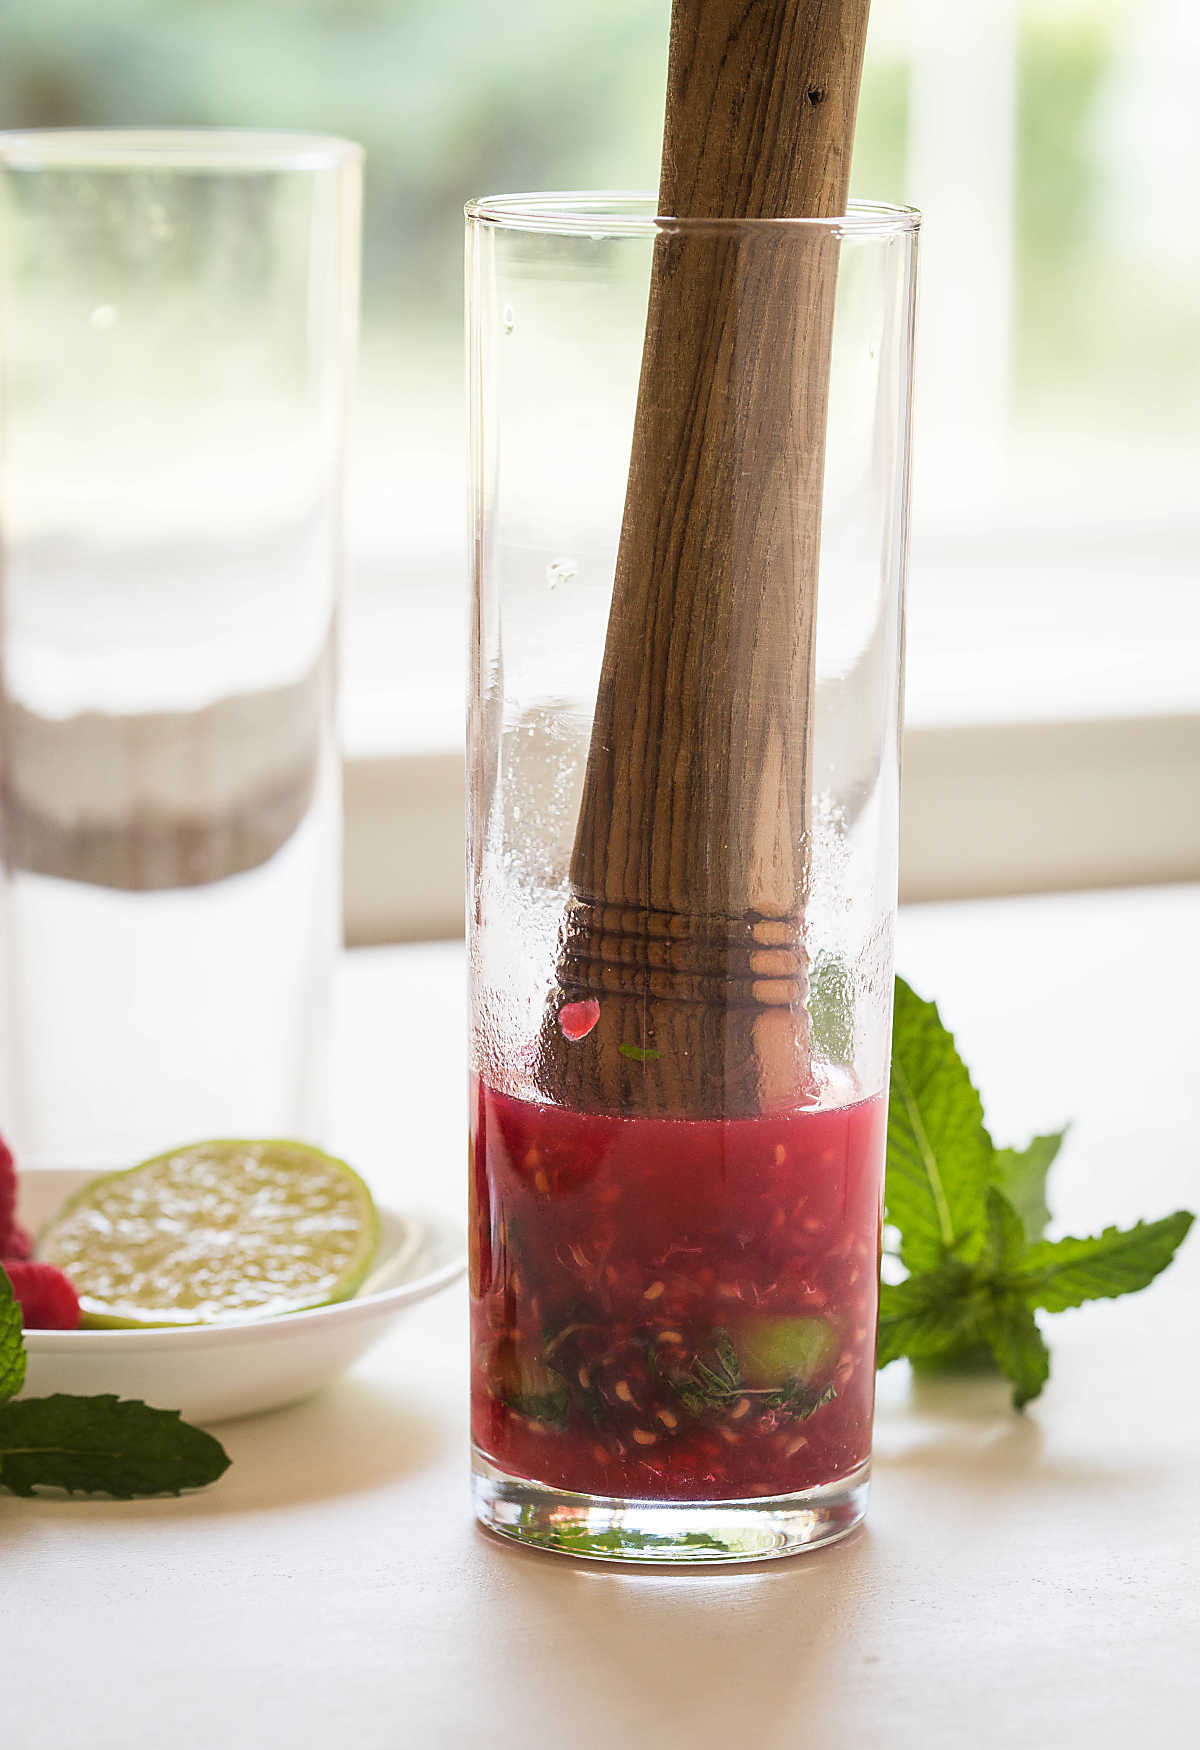 Smashed fresh raspberries with lime slices and mint leaves in a glass with wooden muddler.